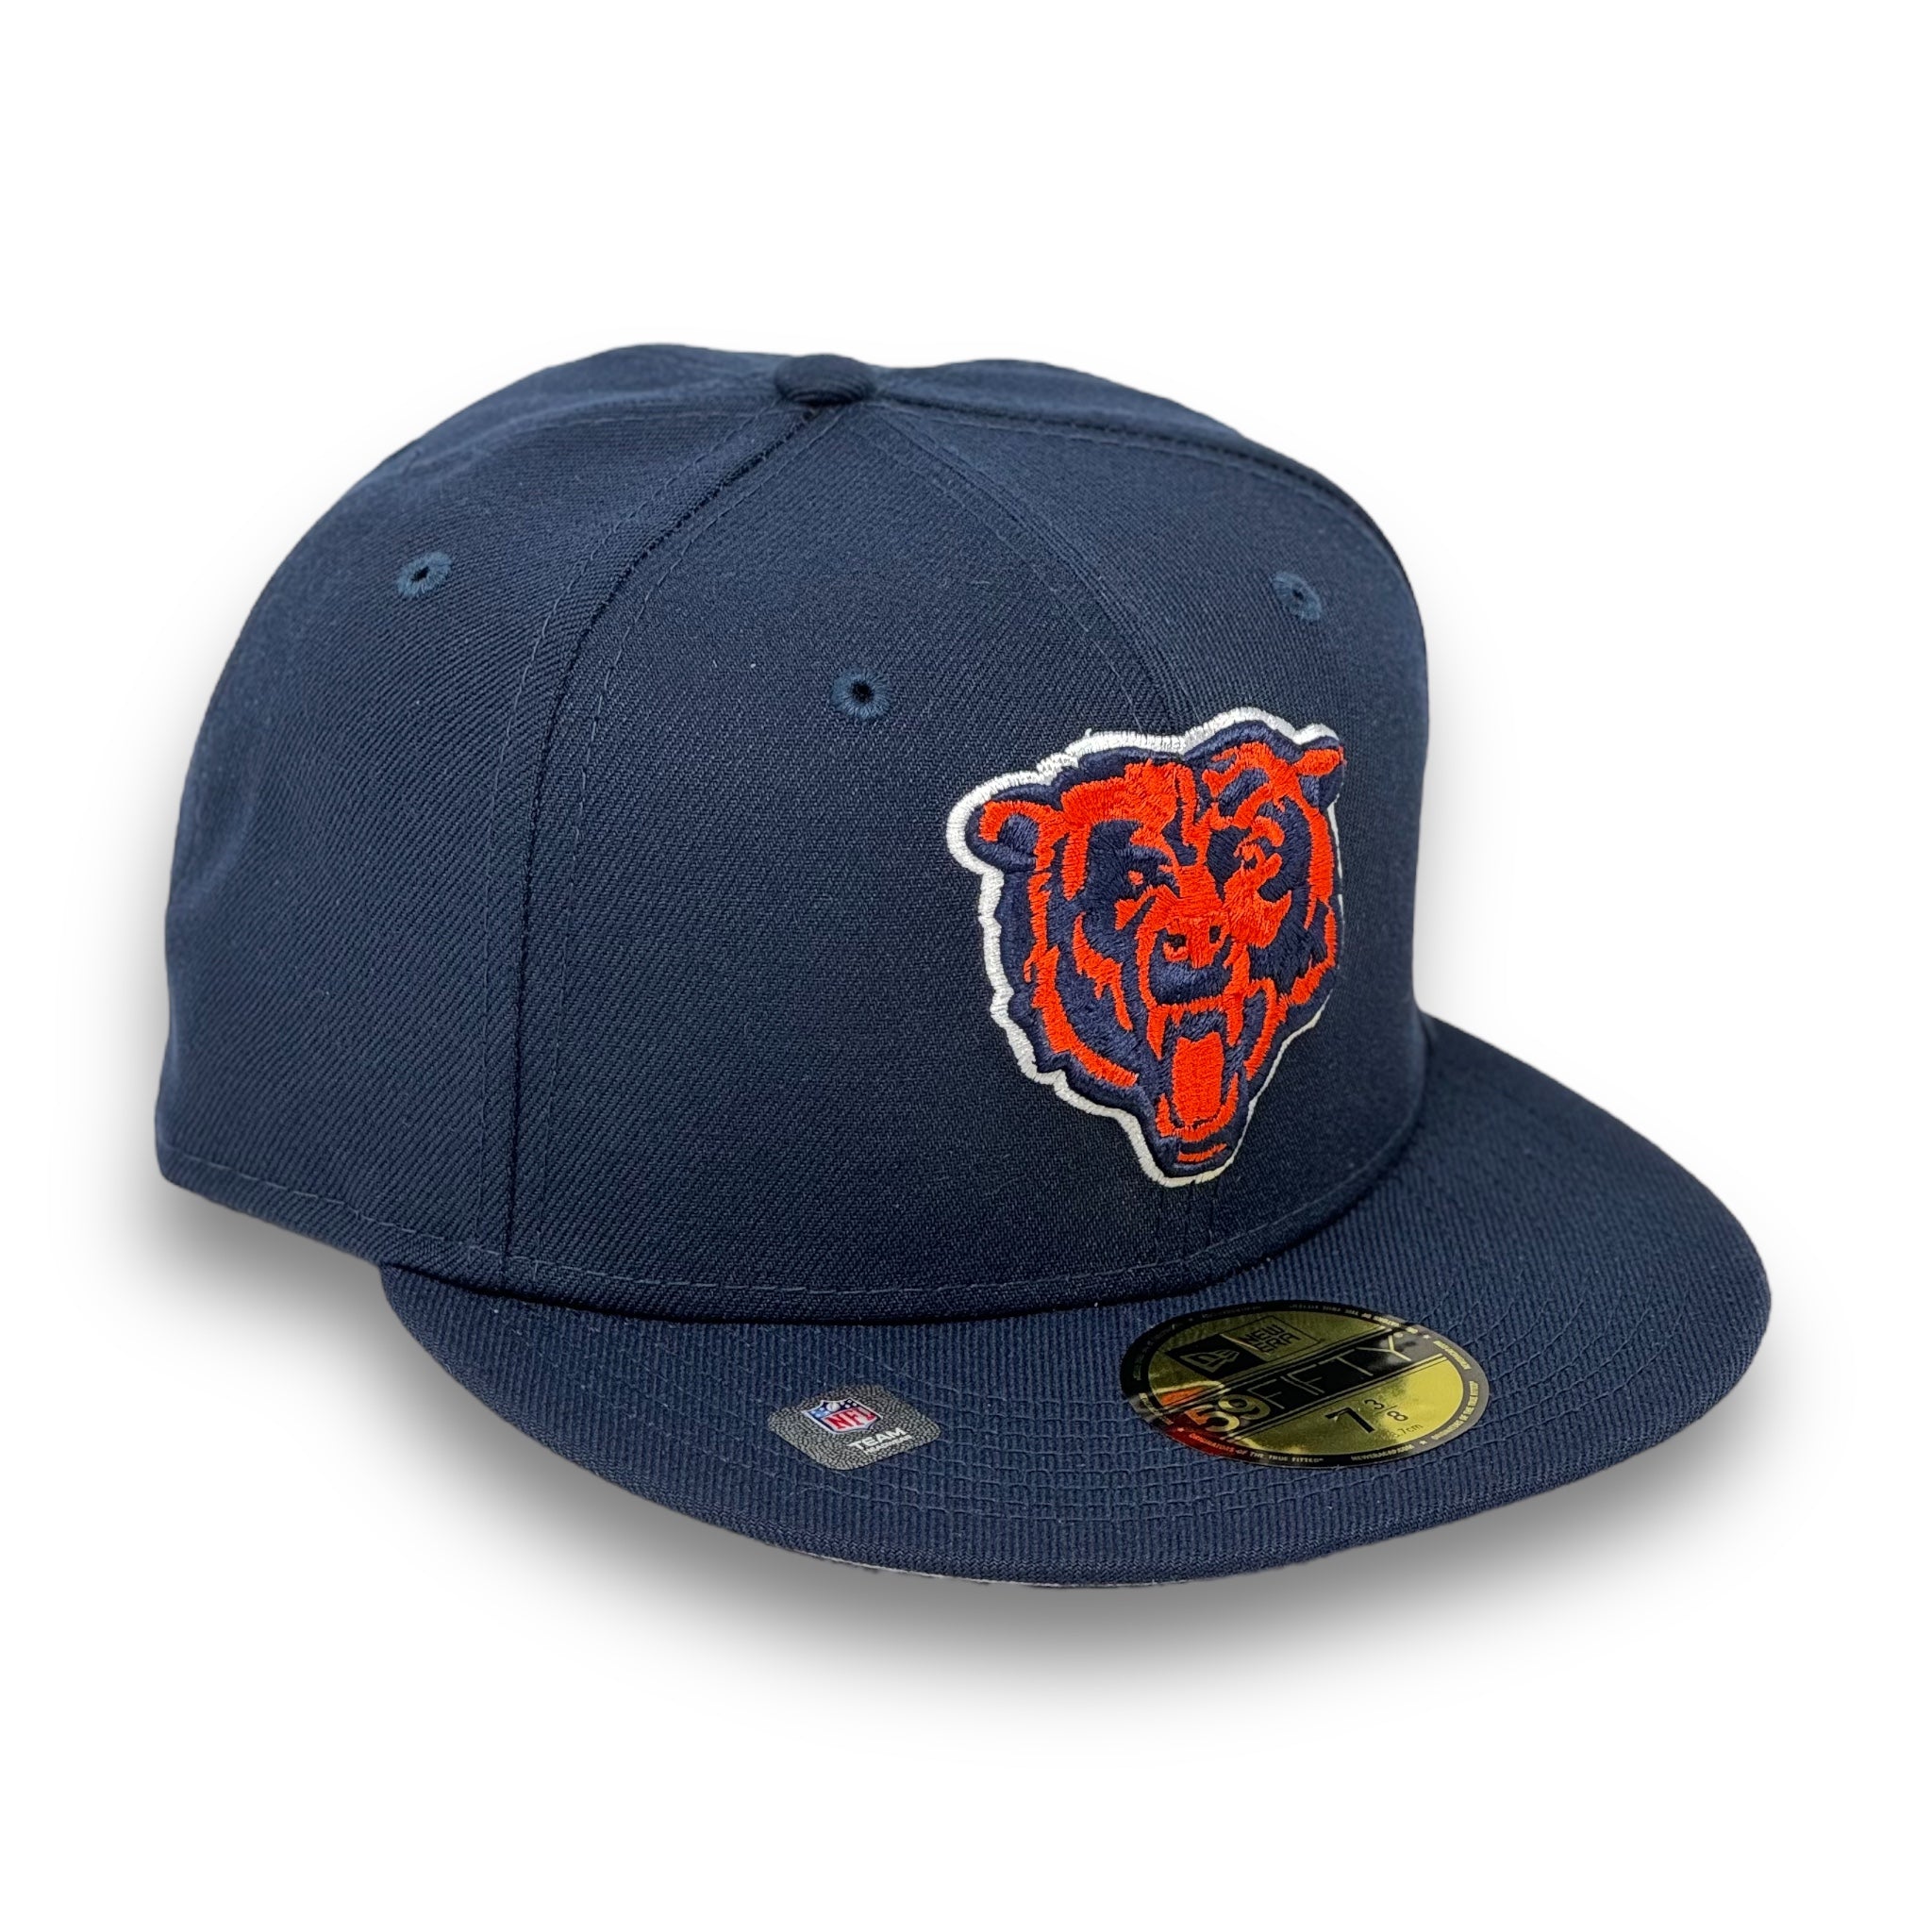 CHICAGO BEARS "HEAD LOGO" NEW ERA 59FIFTY FITTED